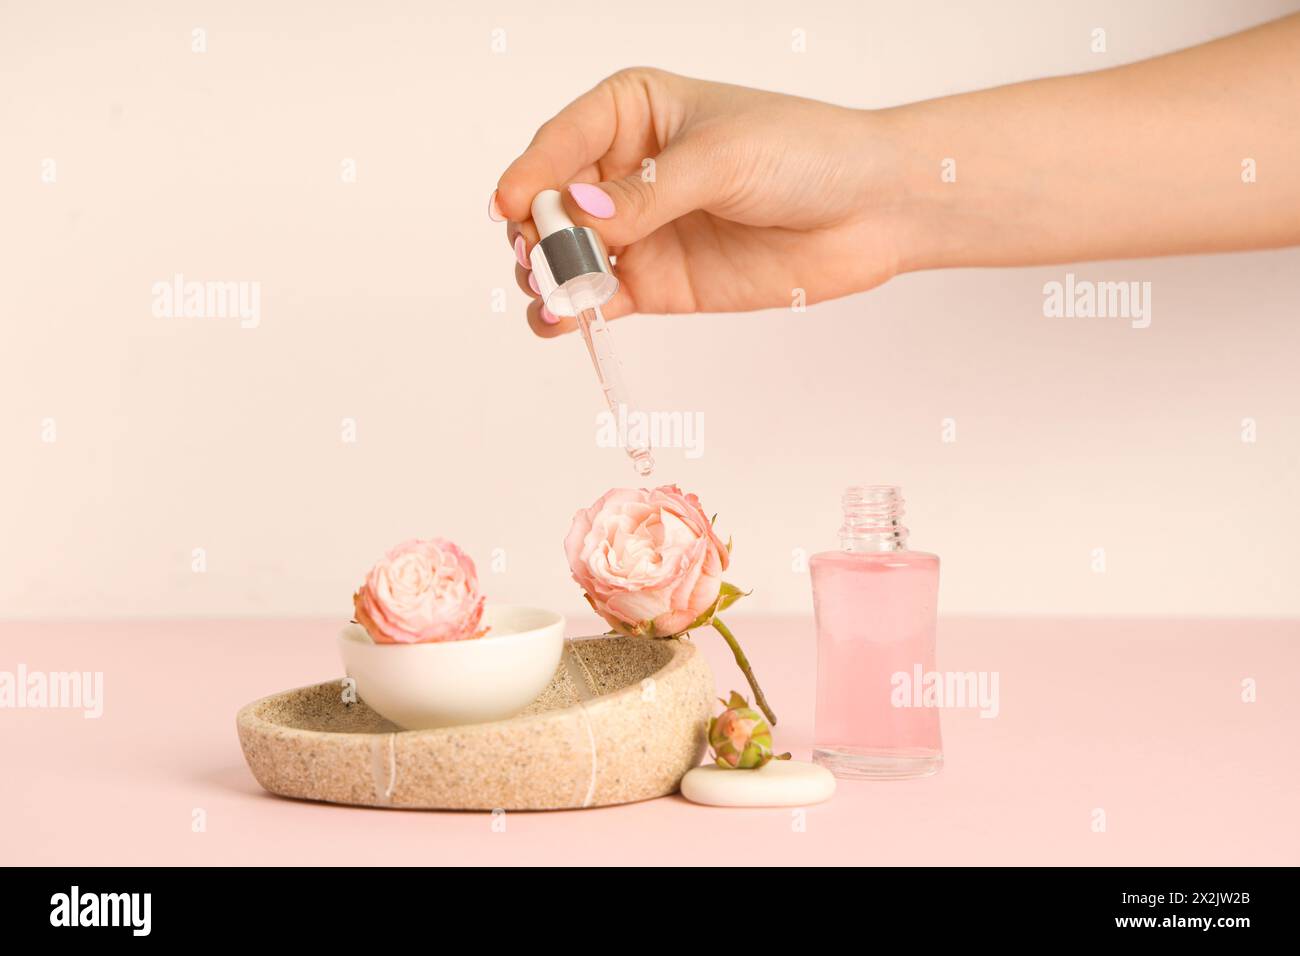 Female hand applying cosmetic oil on roses and stone tray with bowl on pink background Stock Photo